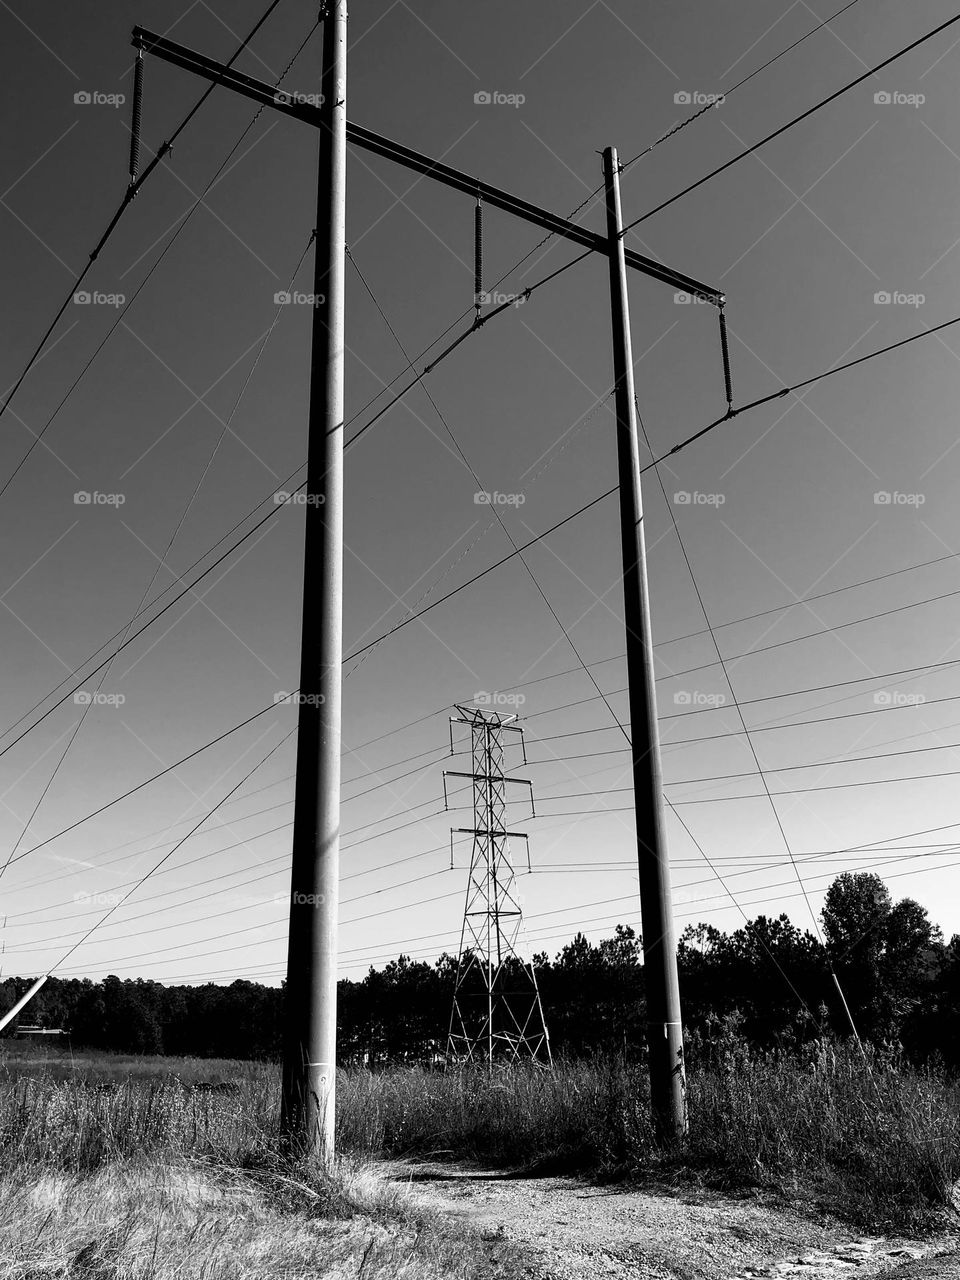 Power lines and poles reaching a monochromatic sky